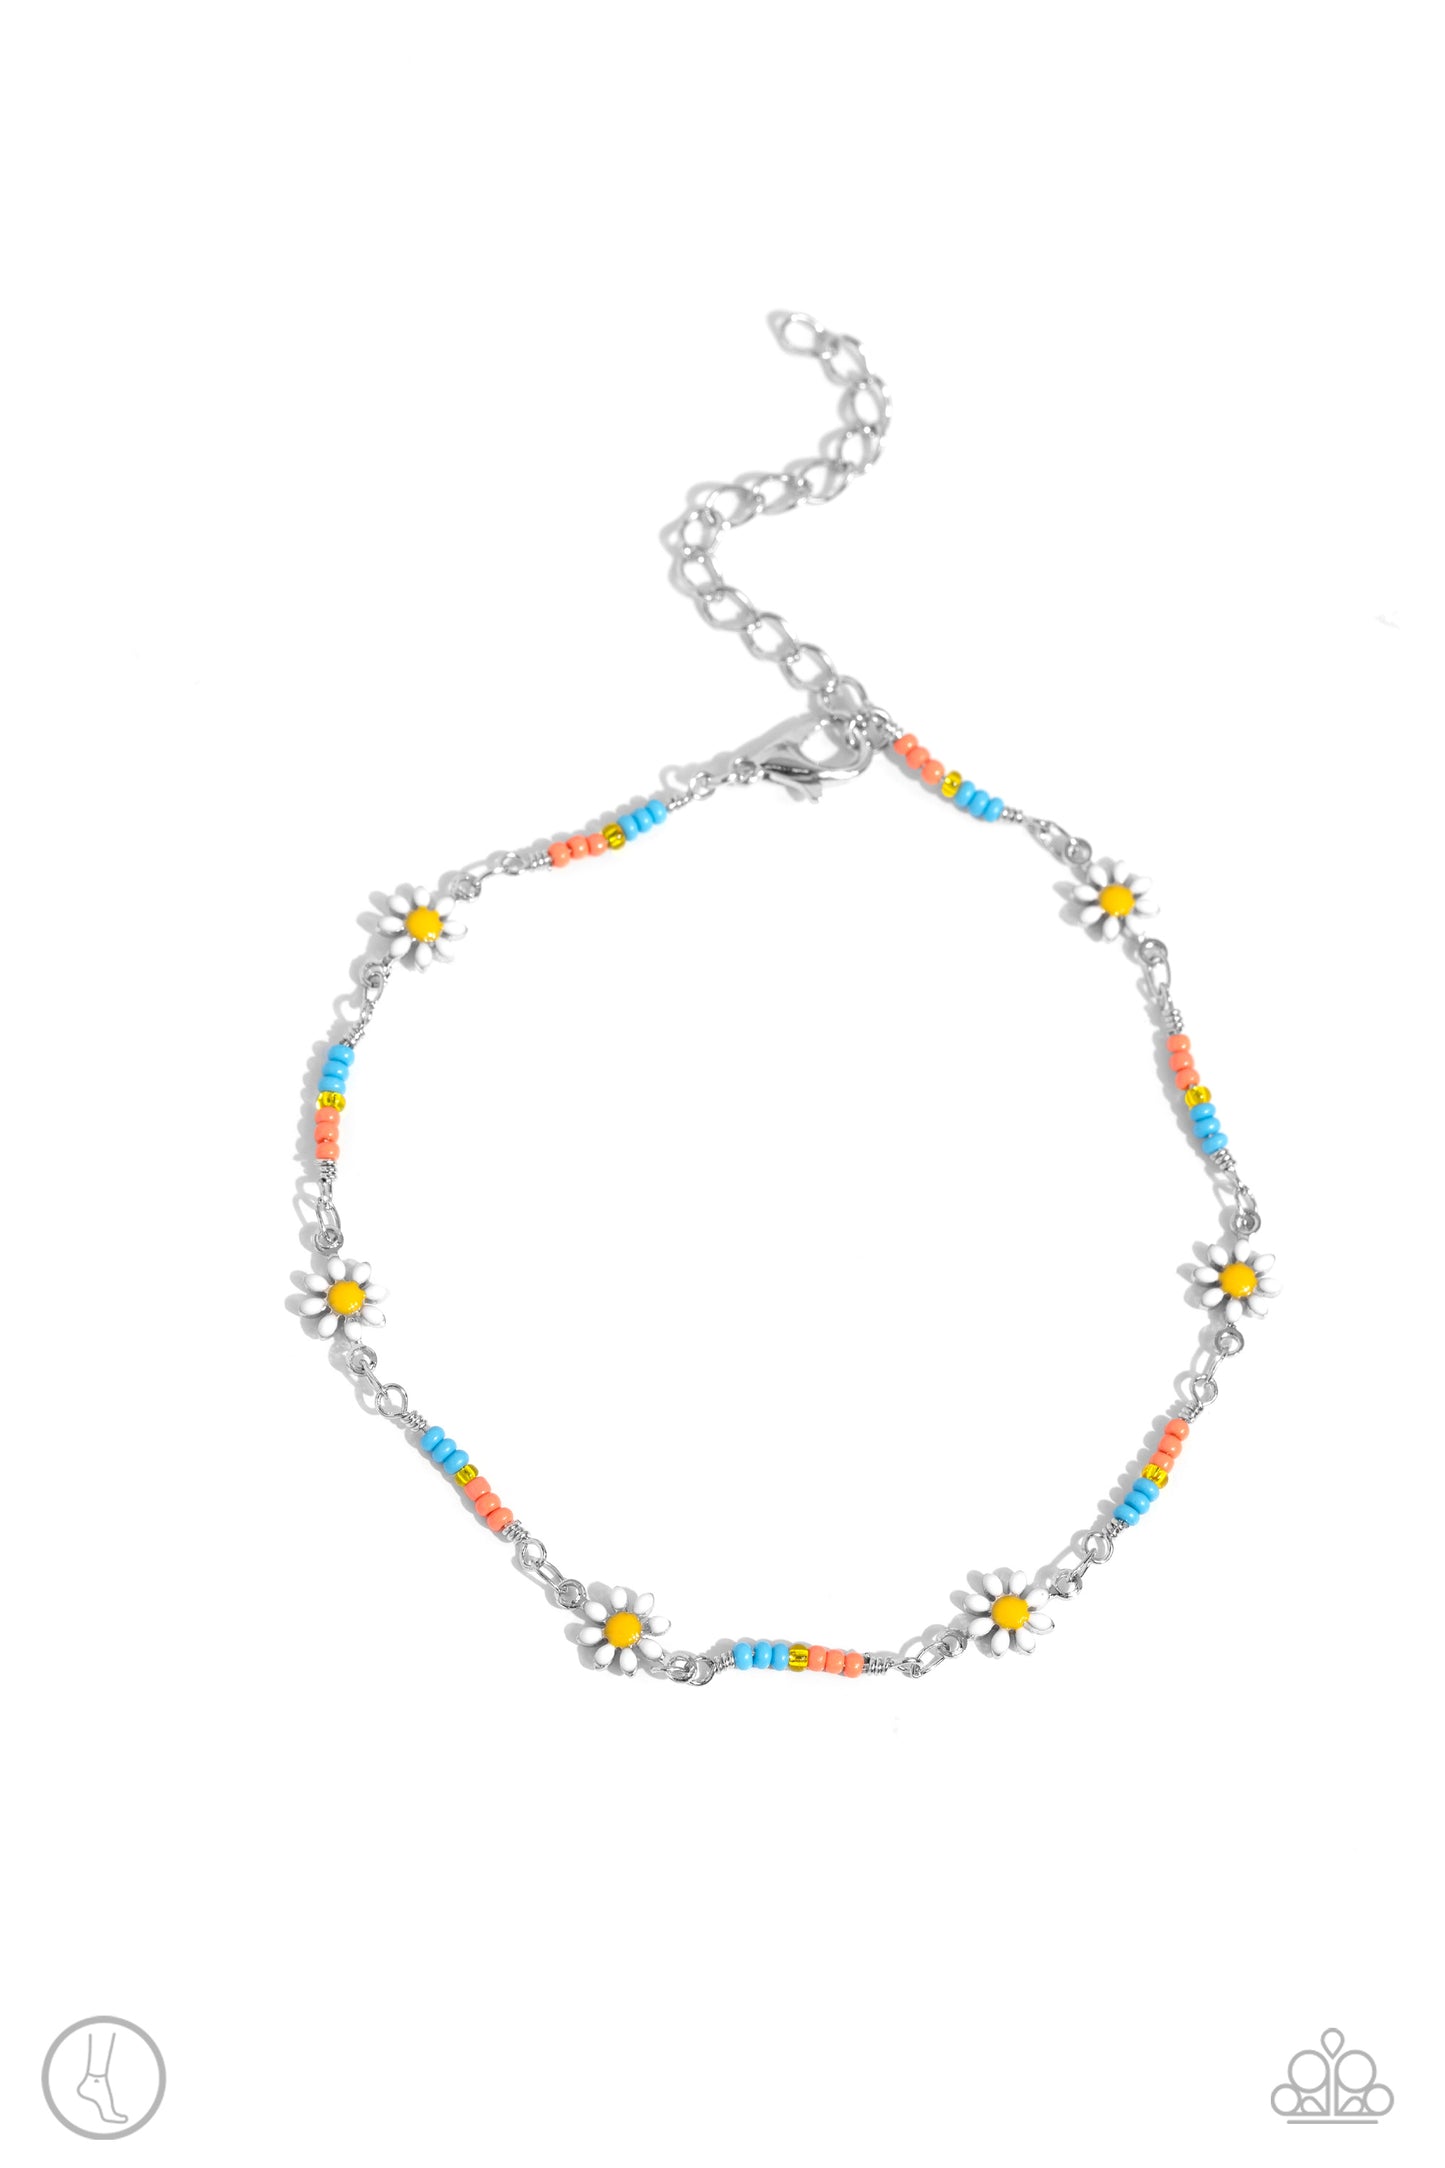 <p>Paparazzi Accessories - Sweetest Daydream - Orange Anklet infused along a classic silver chain, turquoise, coral, and glassy yellow seed beads alternate with white daisy charms around the ankle for an optimistic display. Features an adjustable clasp closure.</p> <p><i>Sold as one individual anklet.</i></p>